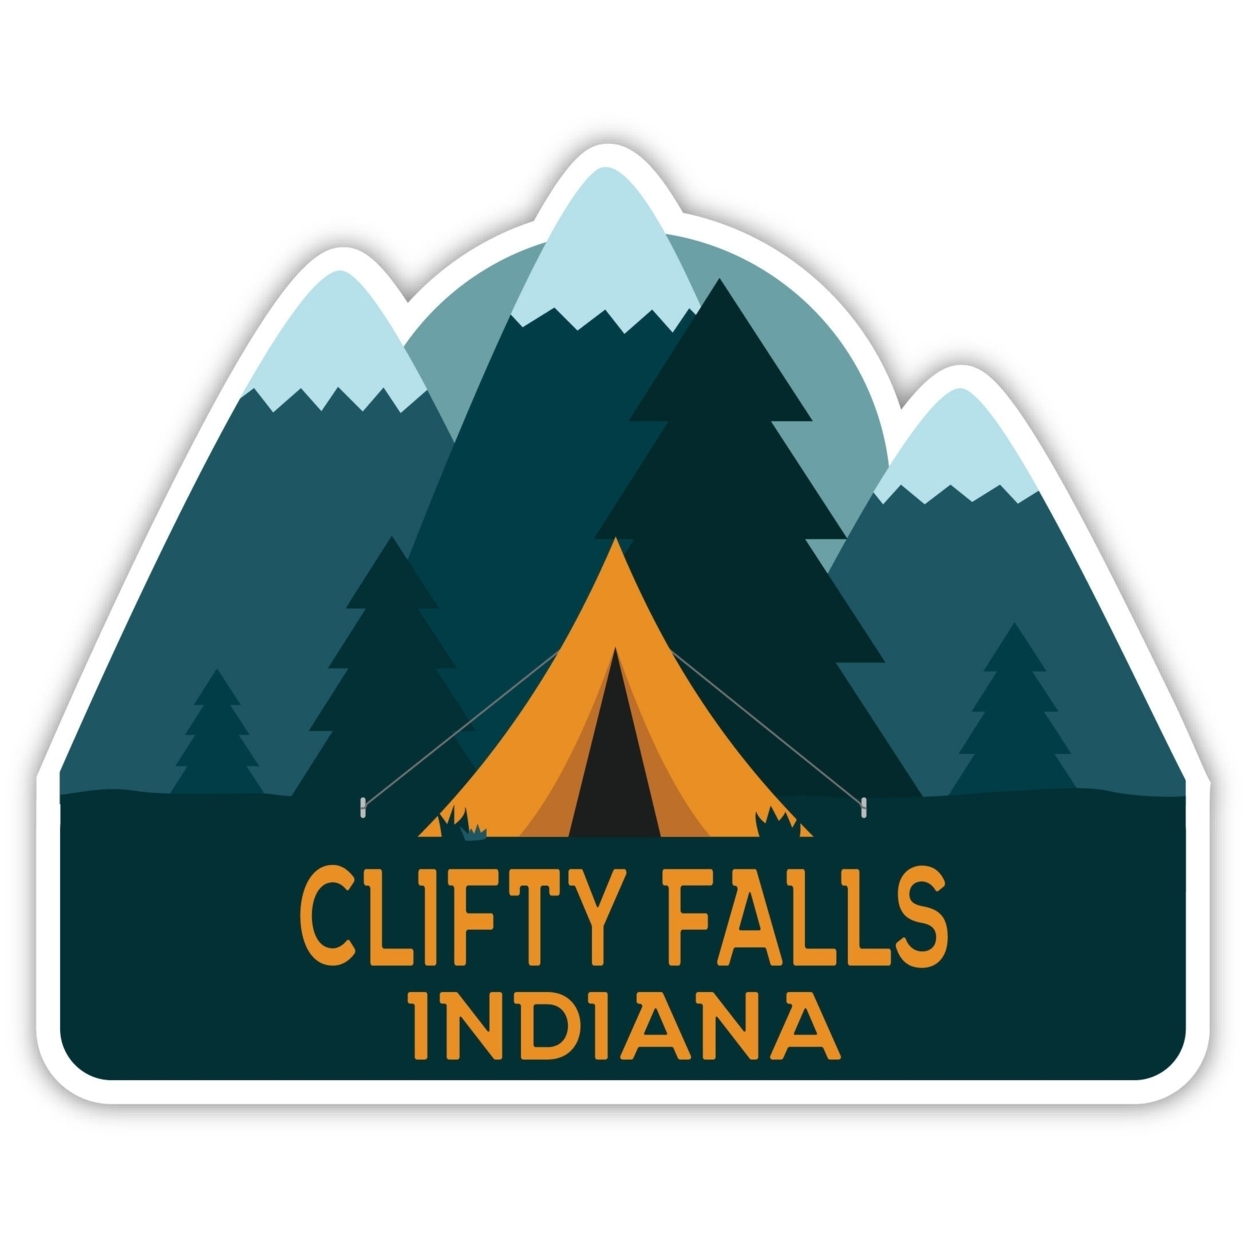 Clifty Falls Indiana Souvenir Decorative Stickers (Choose Theme And Size) - Single Unit, 4-Inch, Tent